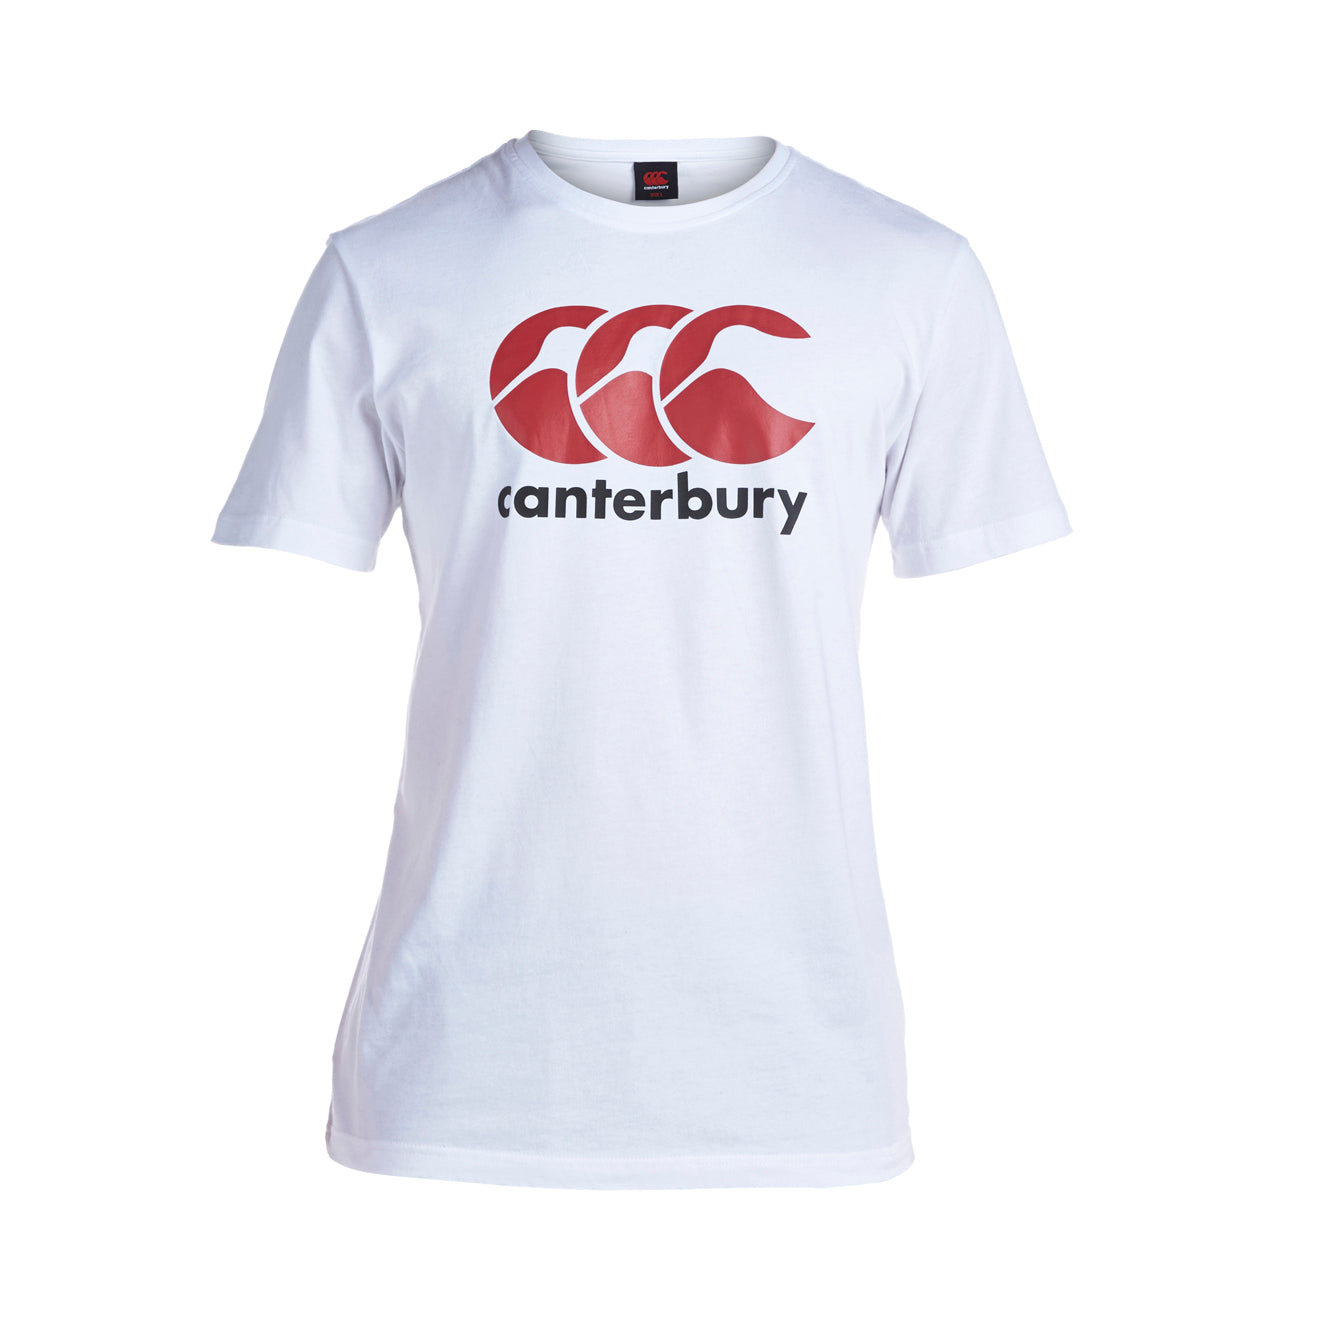 White Canterbury rugby tops with logo product image 